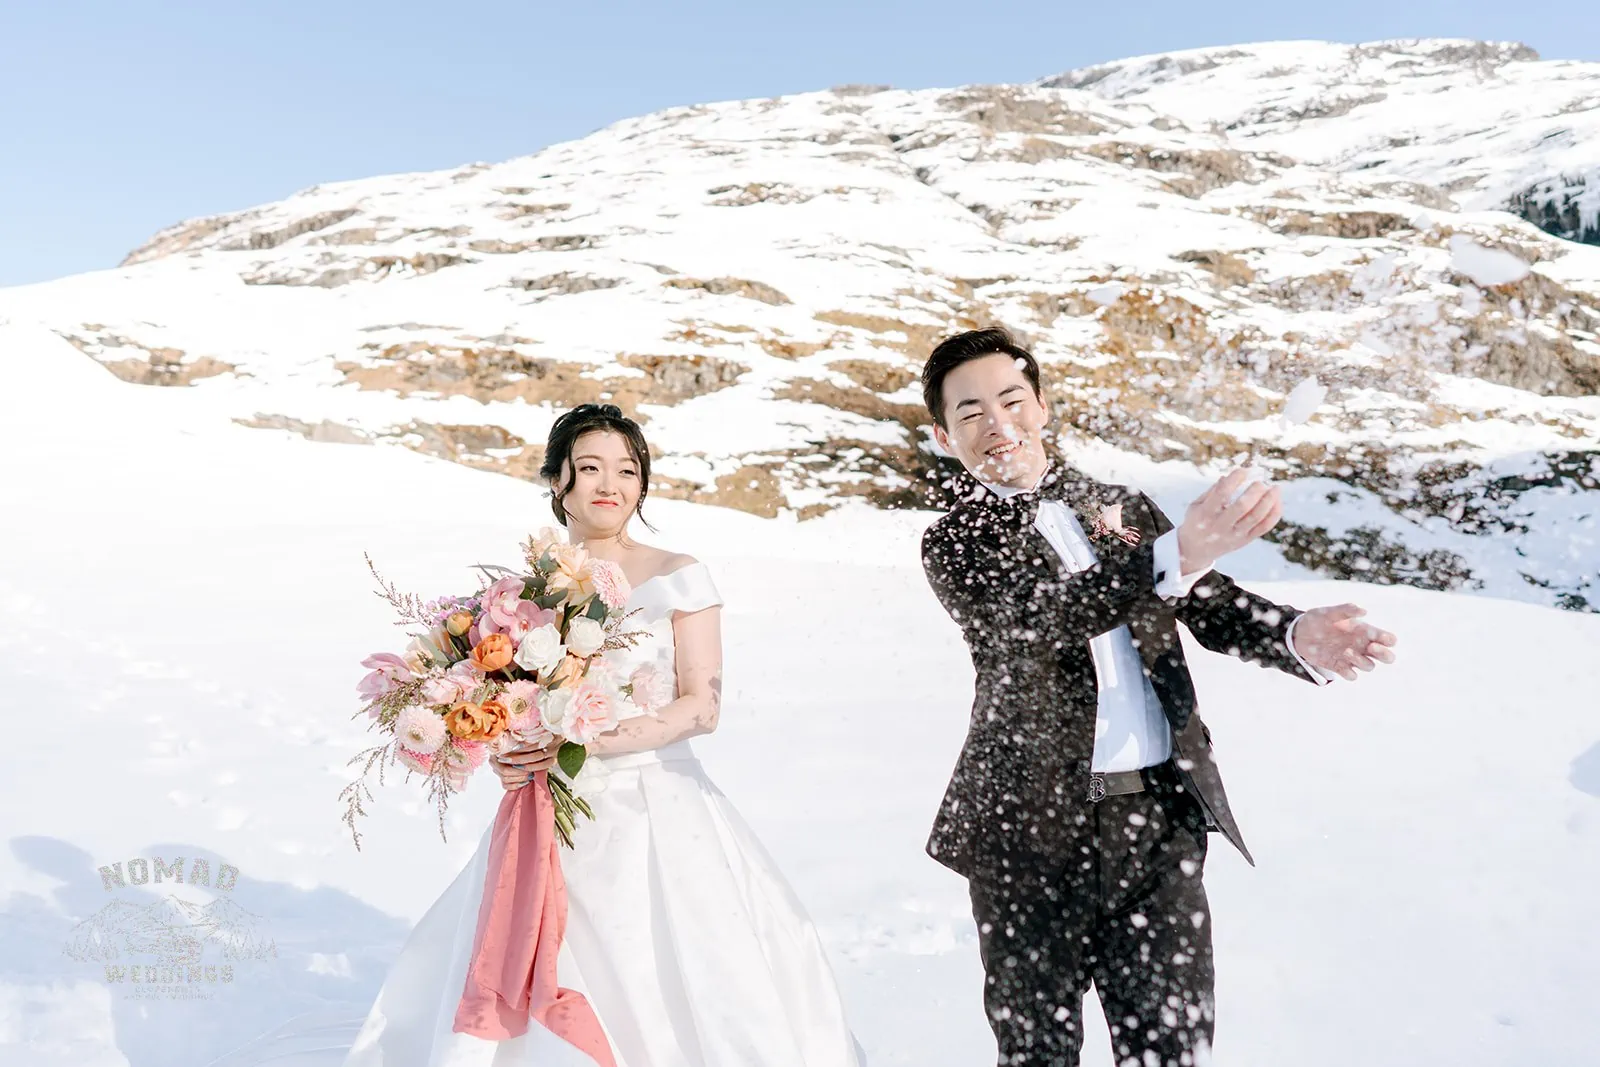 Queenstown New Zealand Elopement Wedding Photographer - Bo and Junyi's Heli Pre Wedding Shoot captures a playful snow fight as the couple joyfully throws snow at each other.